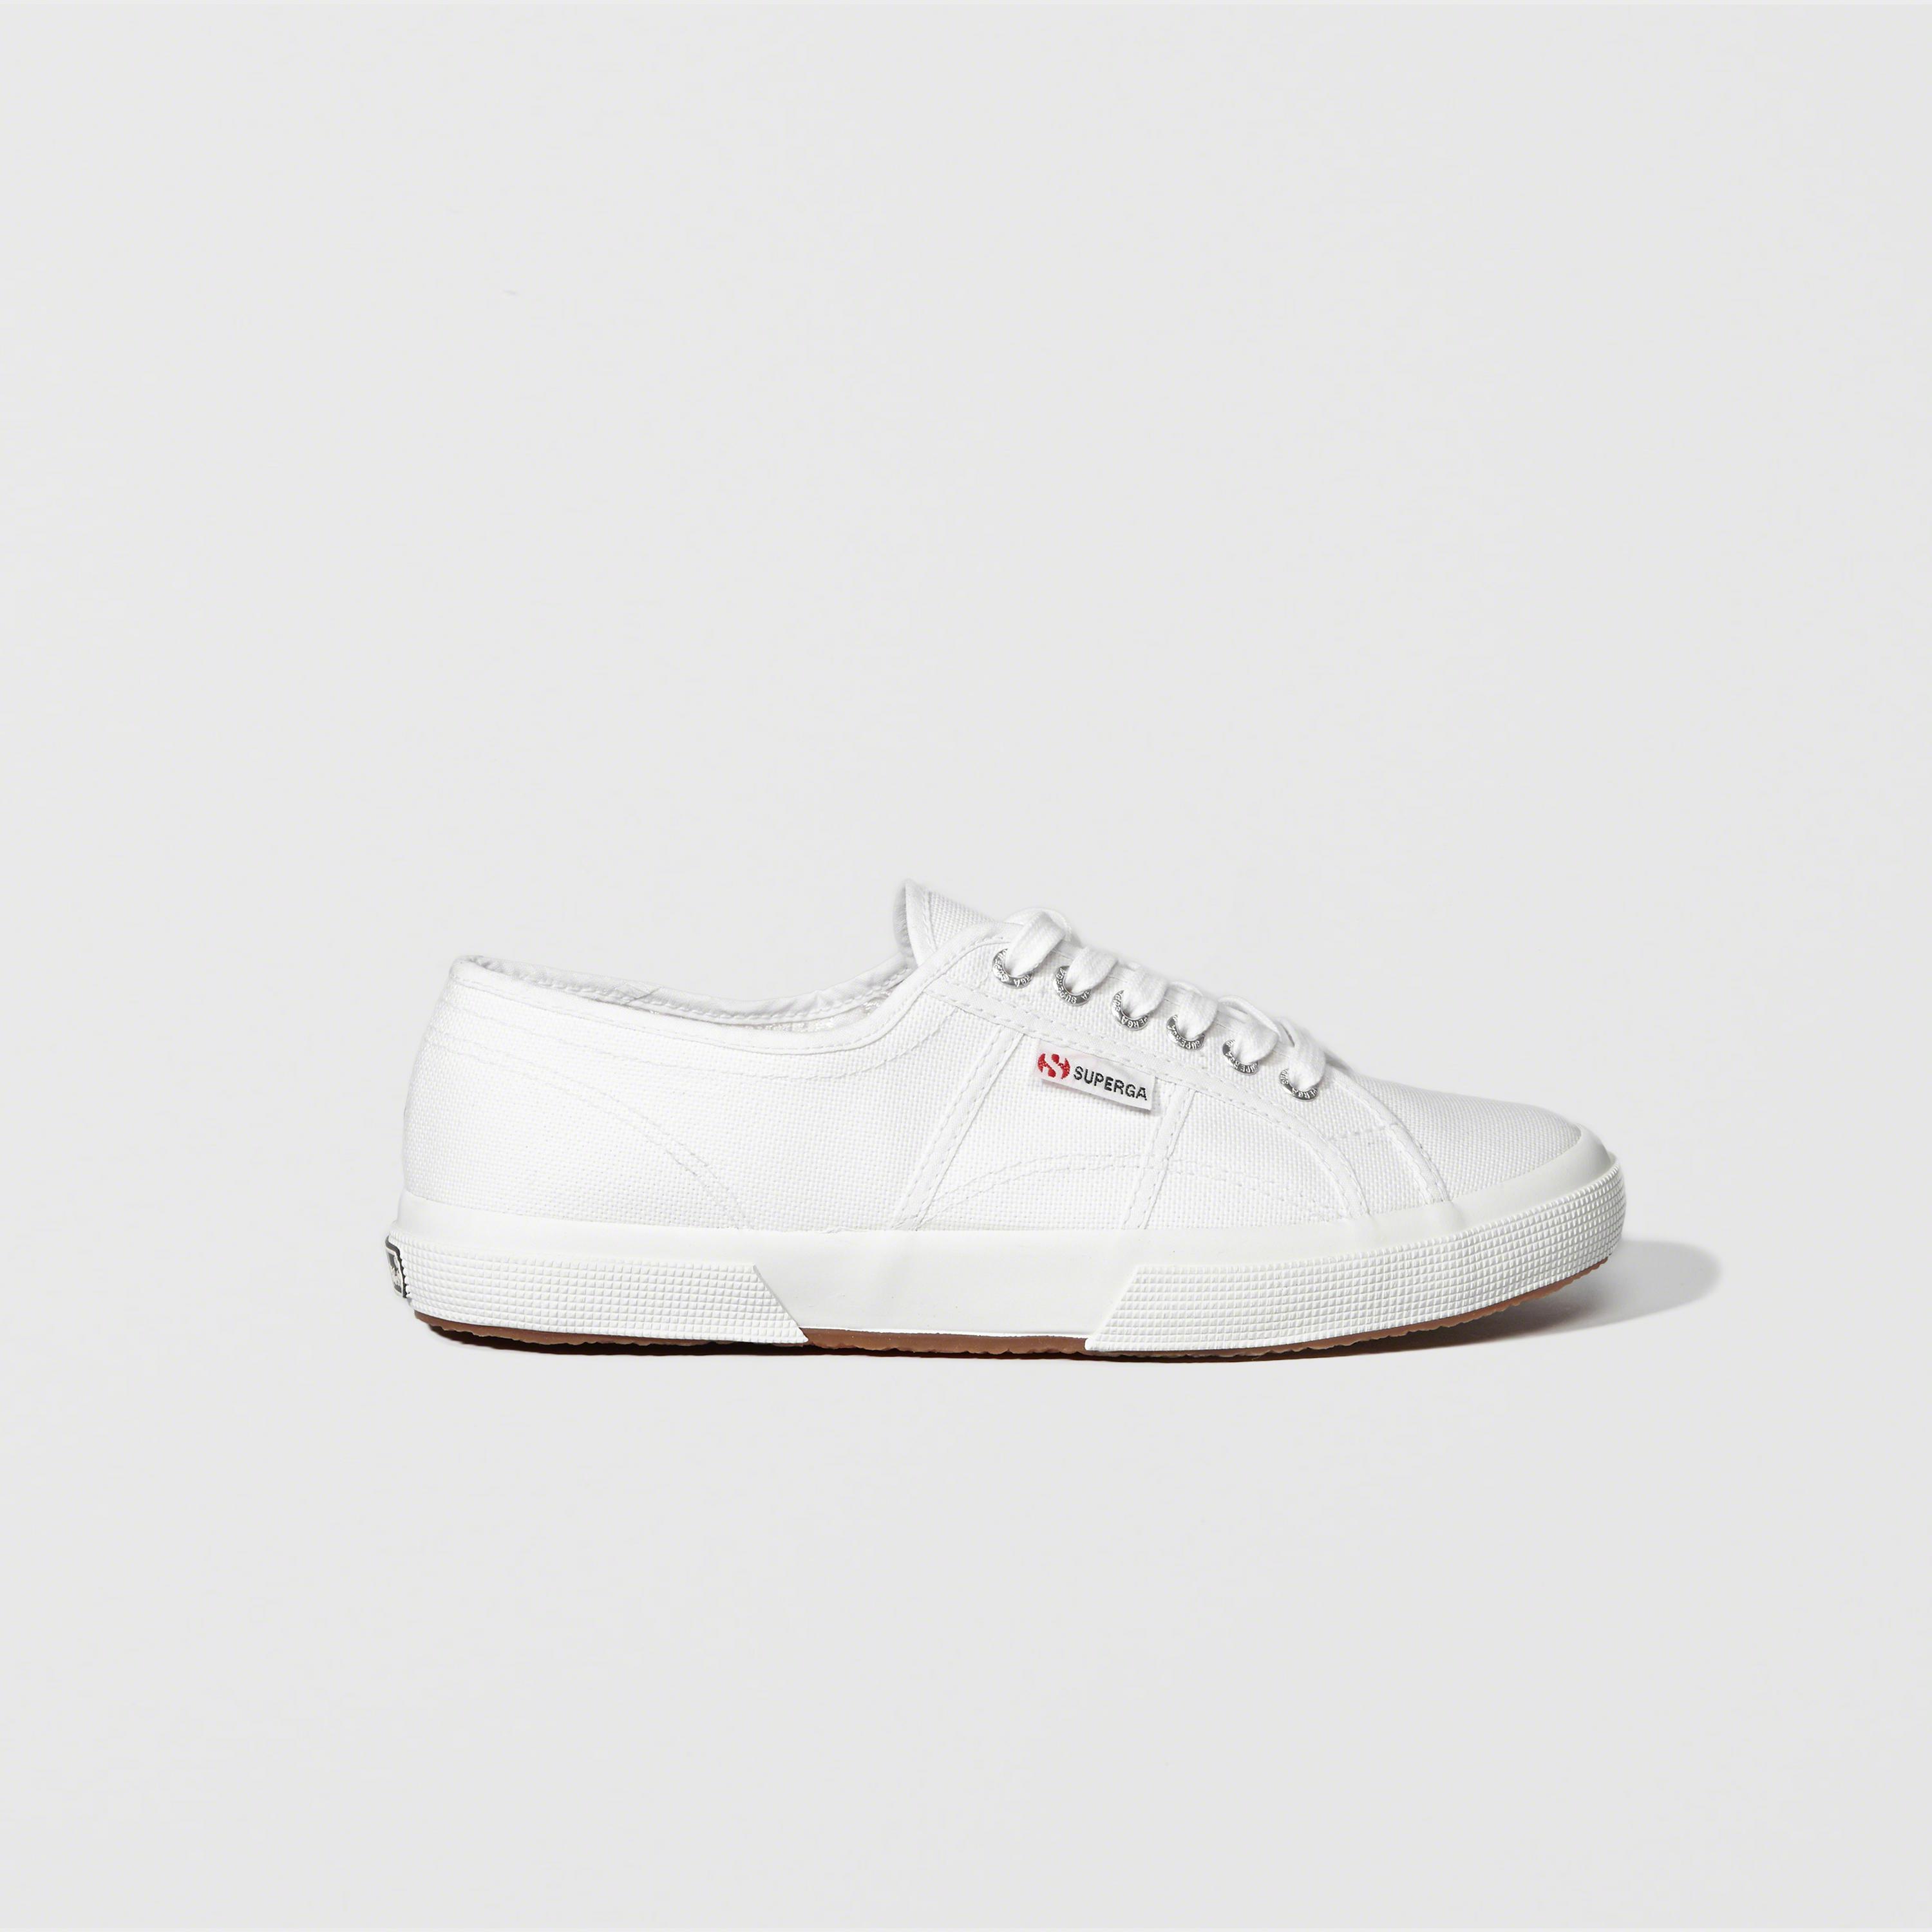 Lyst - Abercrombie & Fitch Superga Classic Cotu Sneakers in White for Men